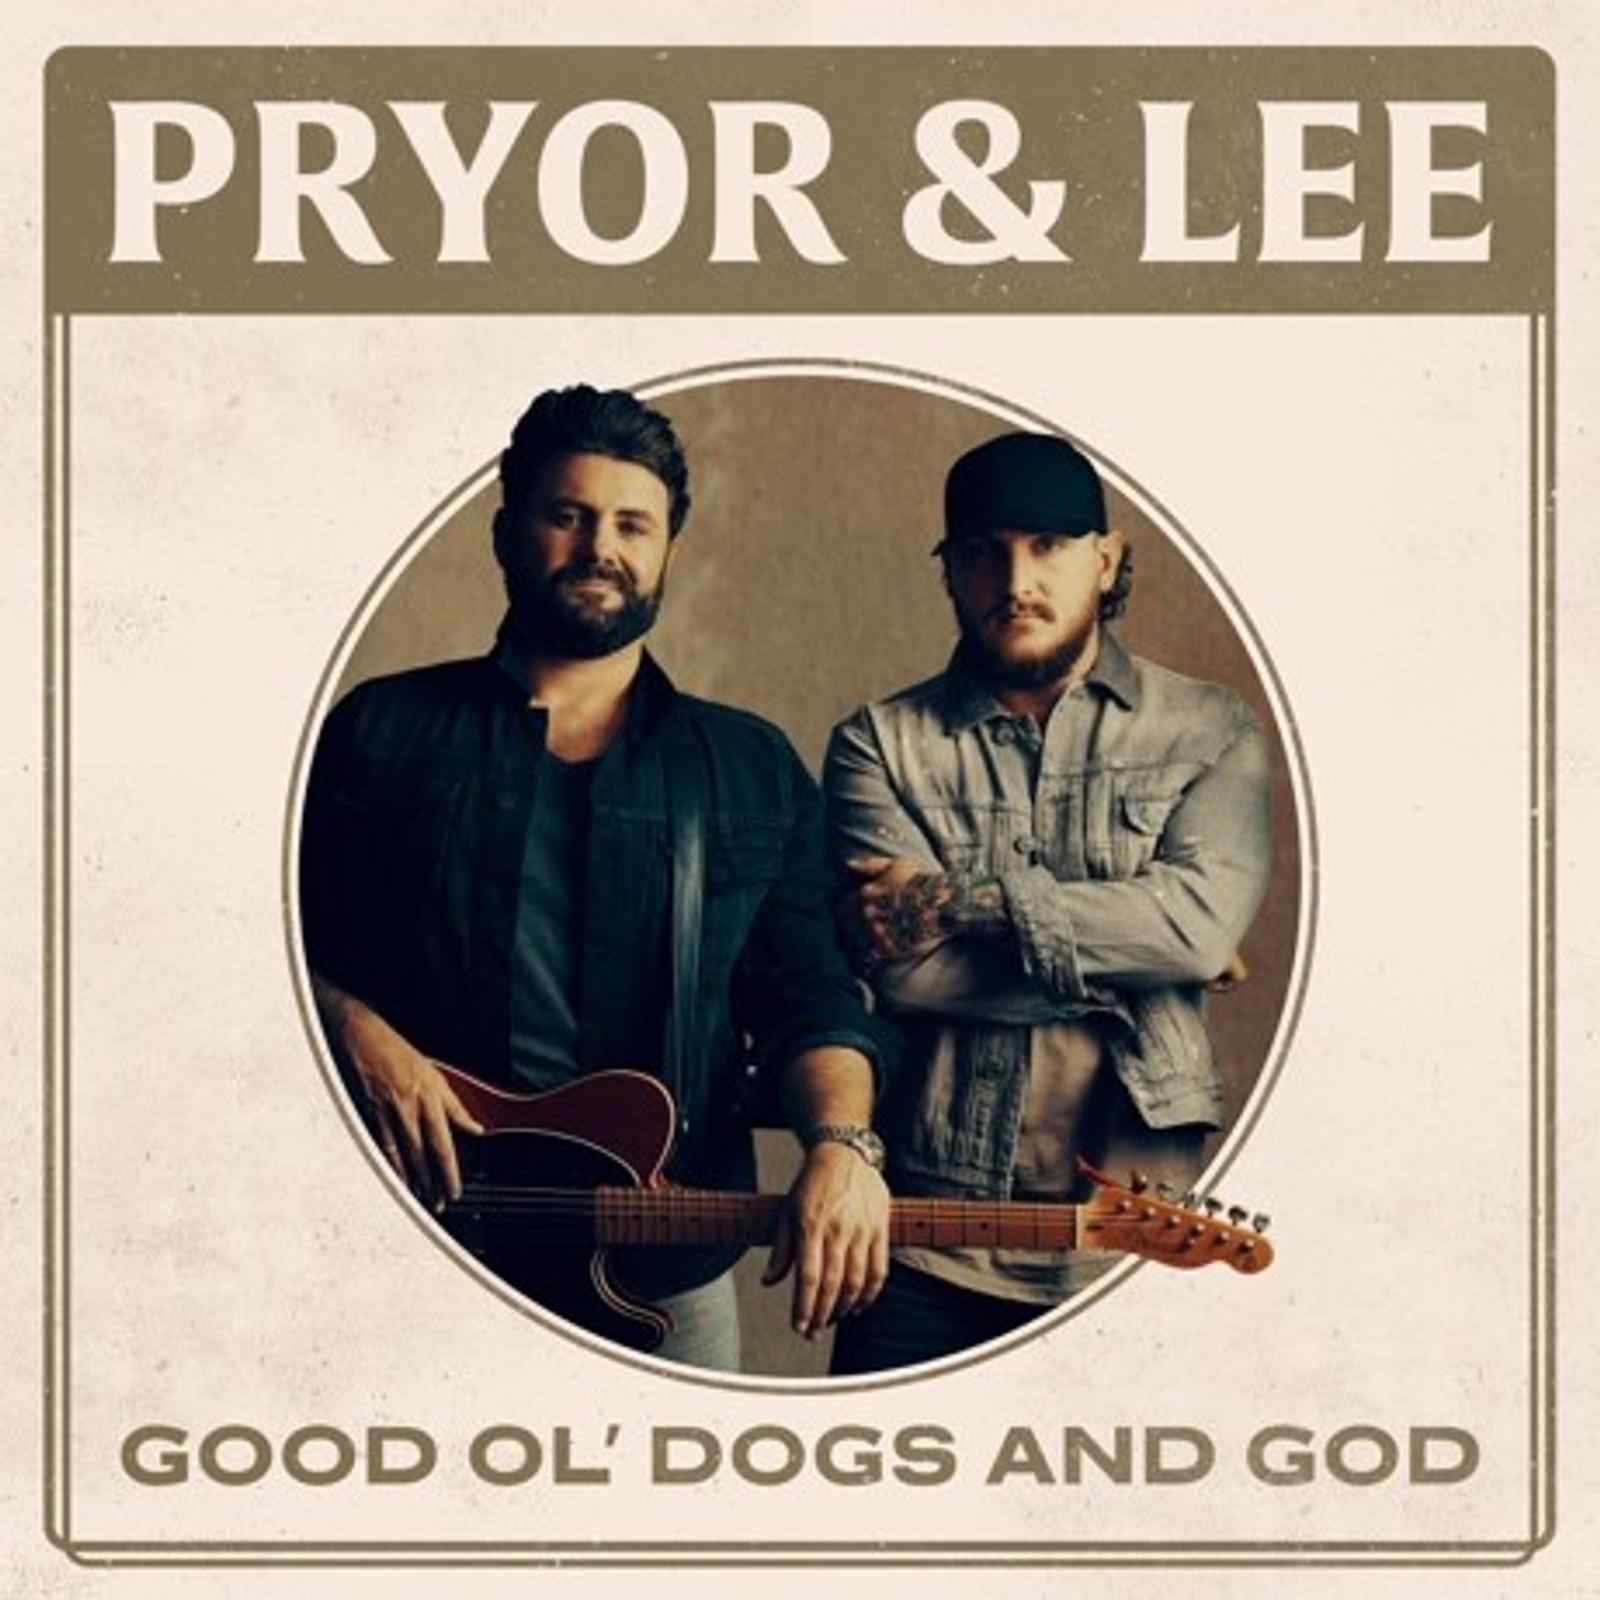 "Good Ol' Dogs and God" by Pryor & Lee